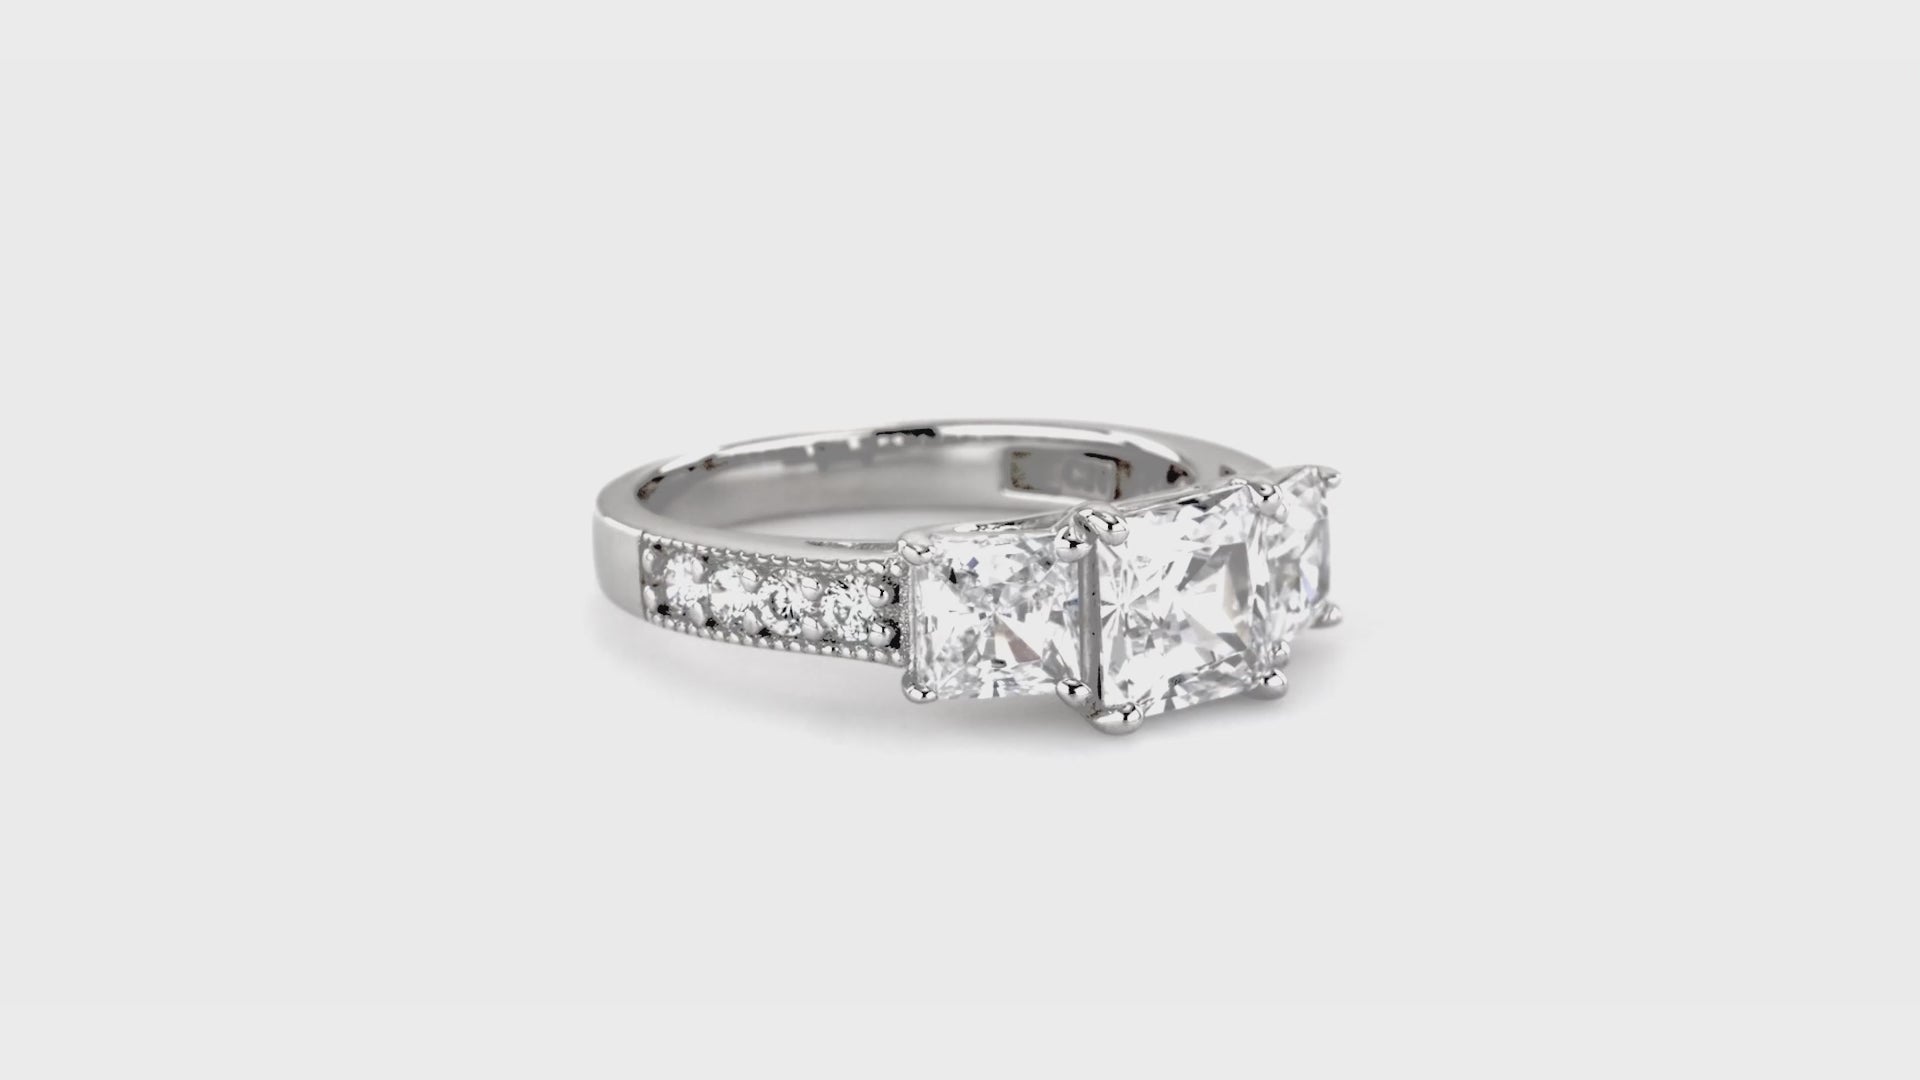 Video Contains 3-Stone Princess CZ Ring in Sterling Silver. Style Number R813-01